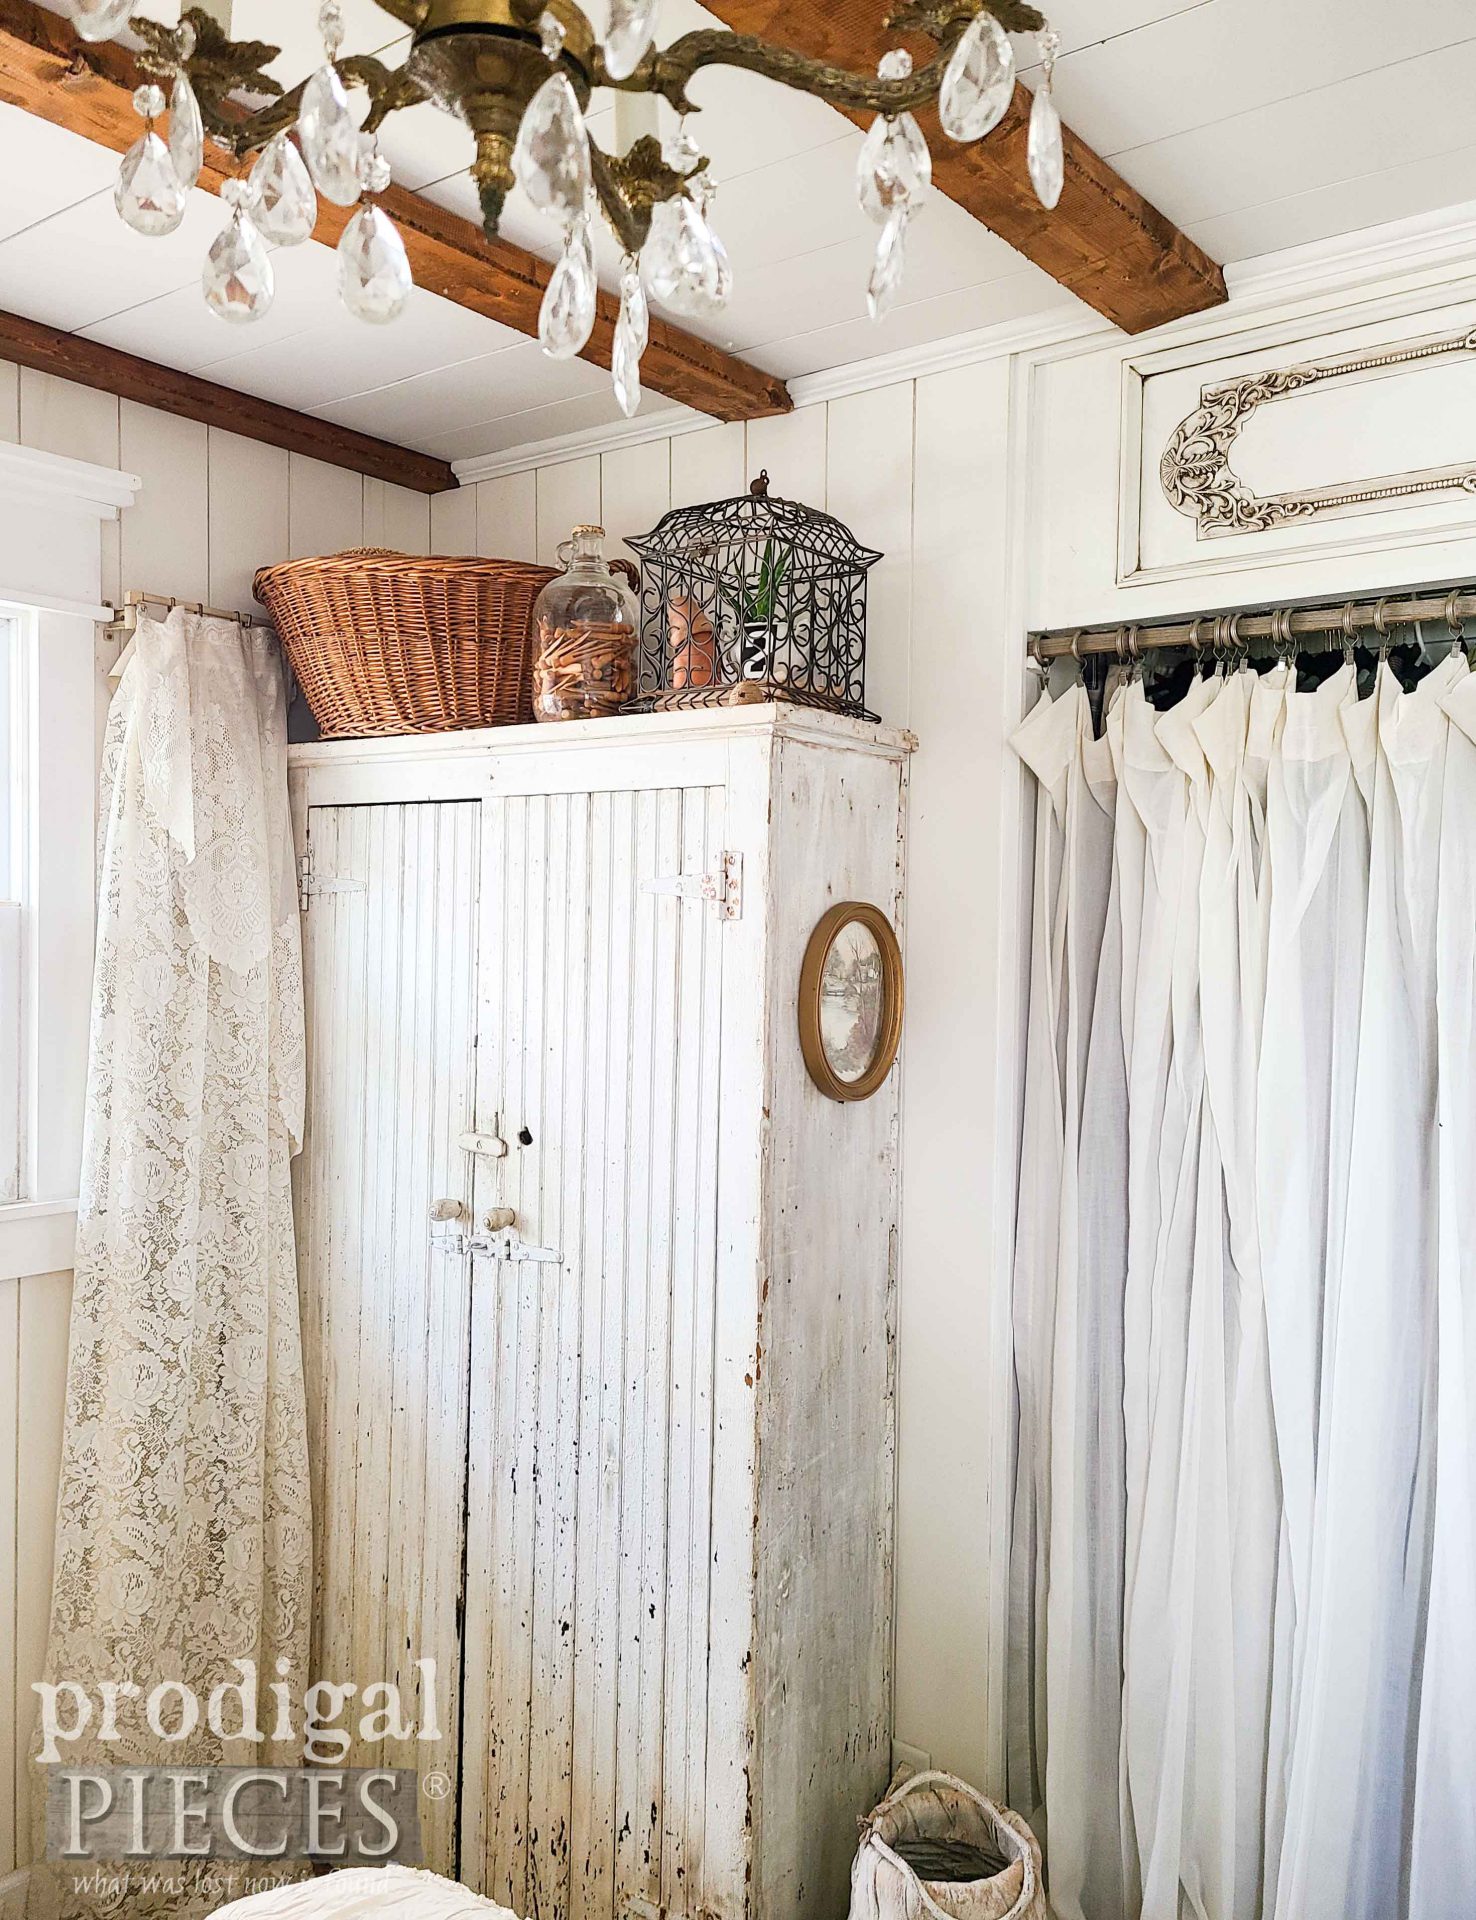 Farmhouse Bedroom Decor featuring a Vintage Bird Cage by Larissa of Prodigal Pieces | prodigalpieces.com #prodigalpieces #farmhouse #home #spring